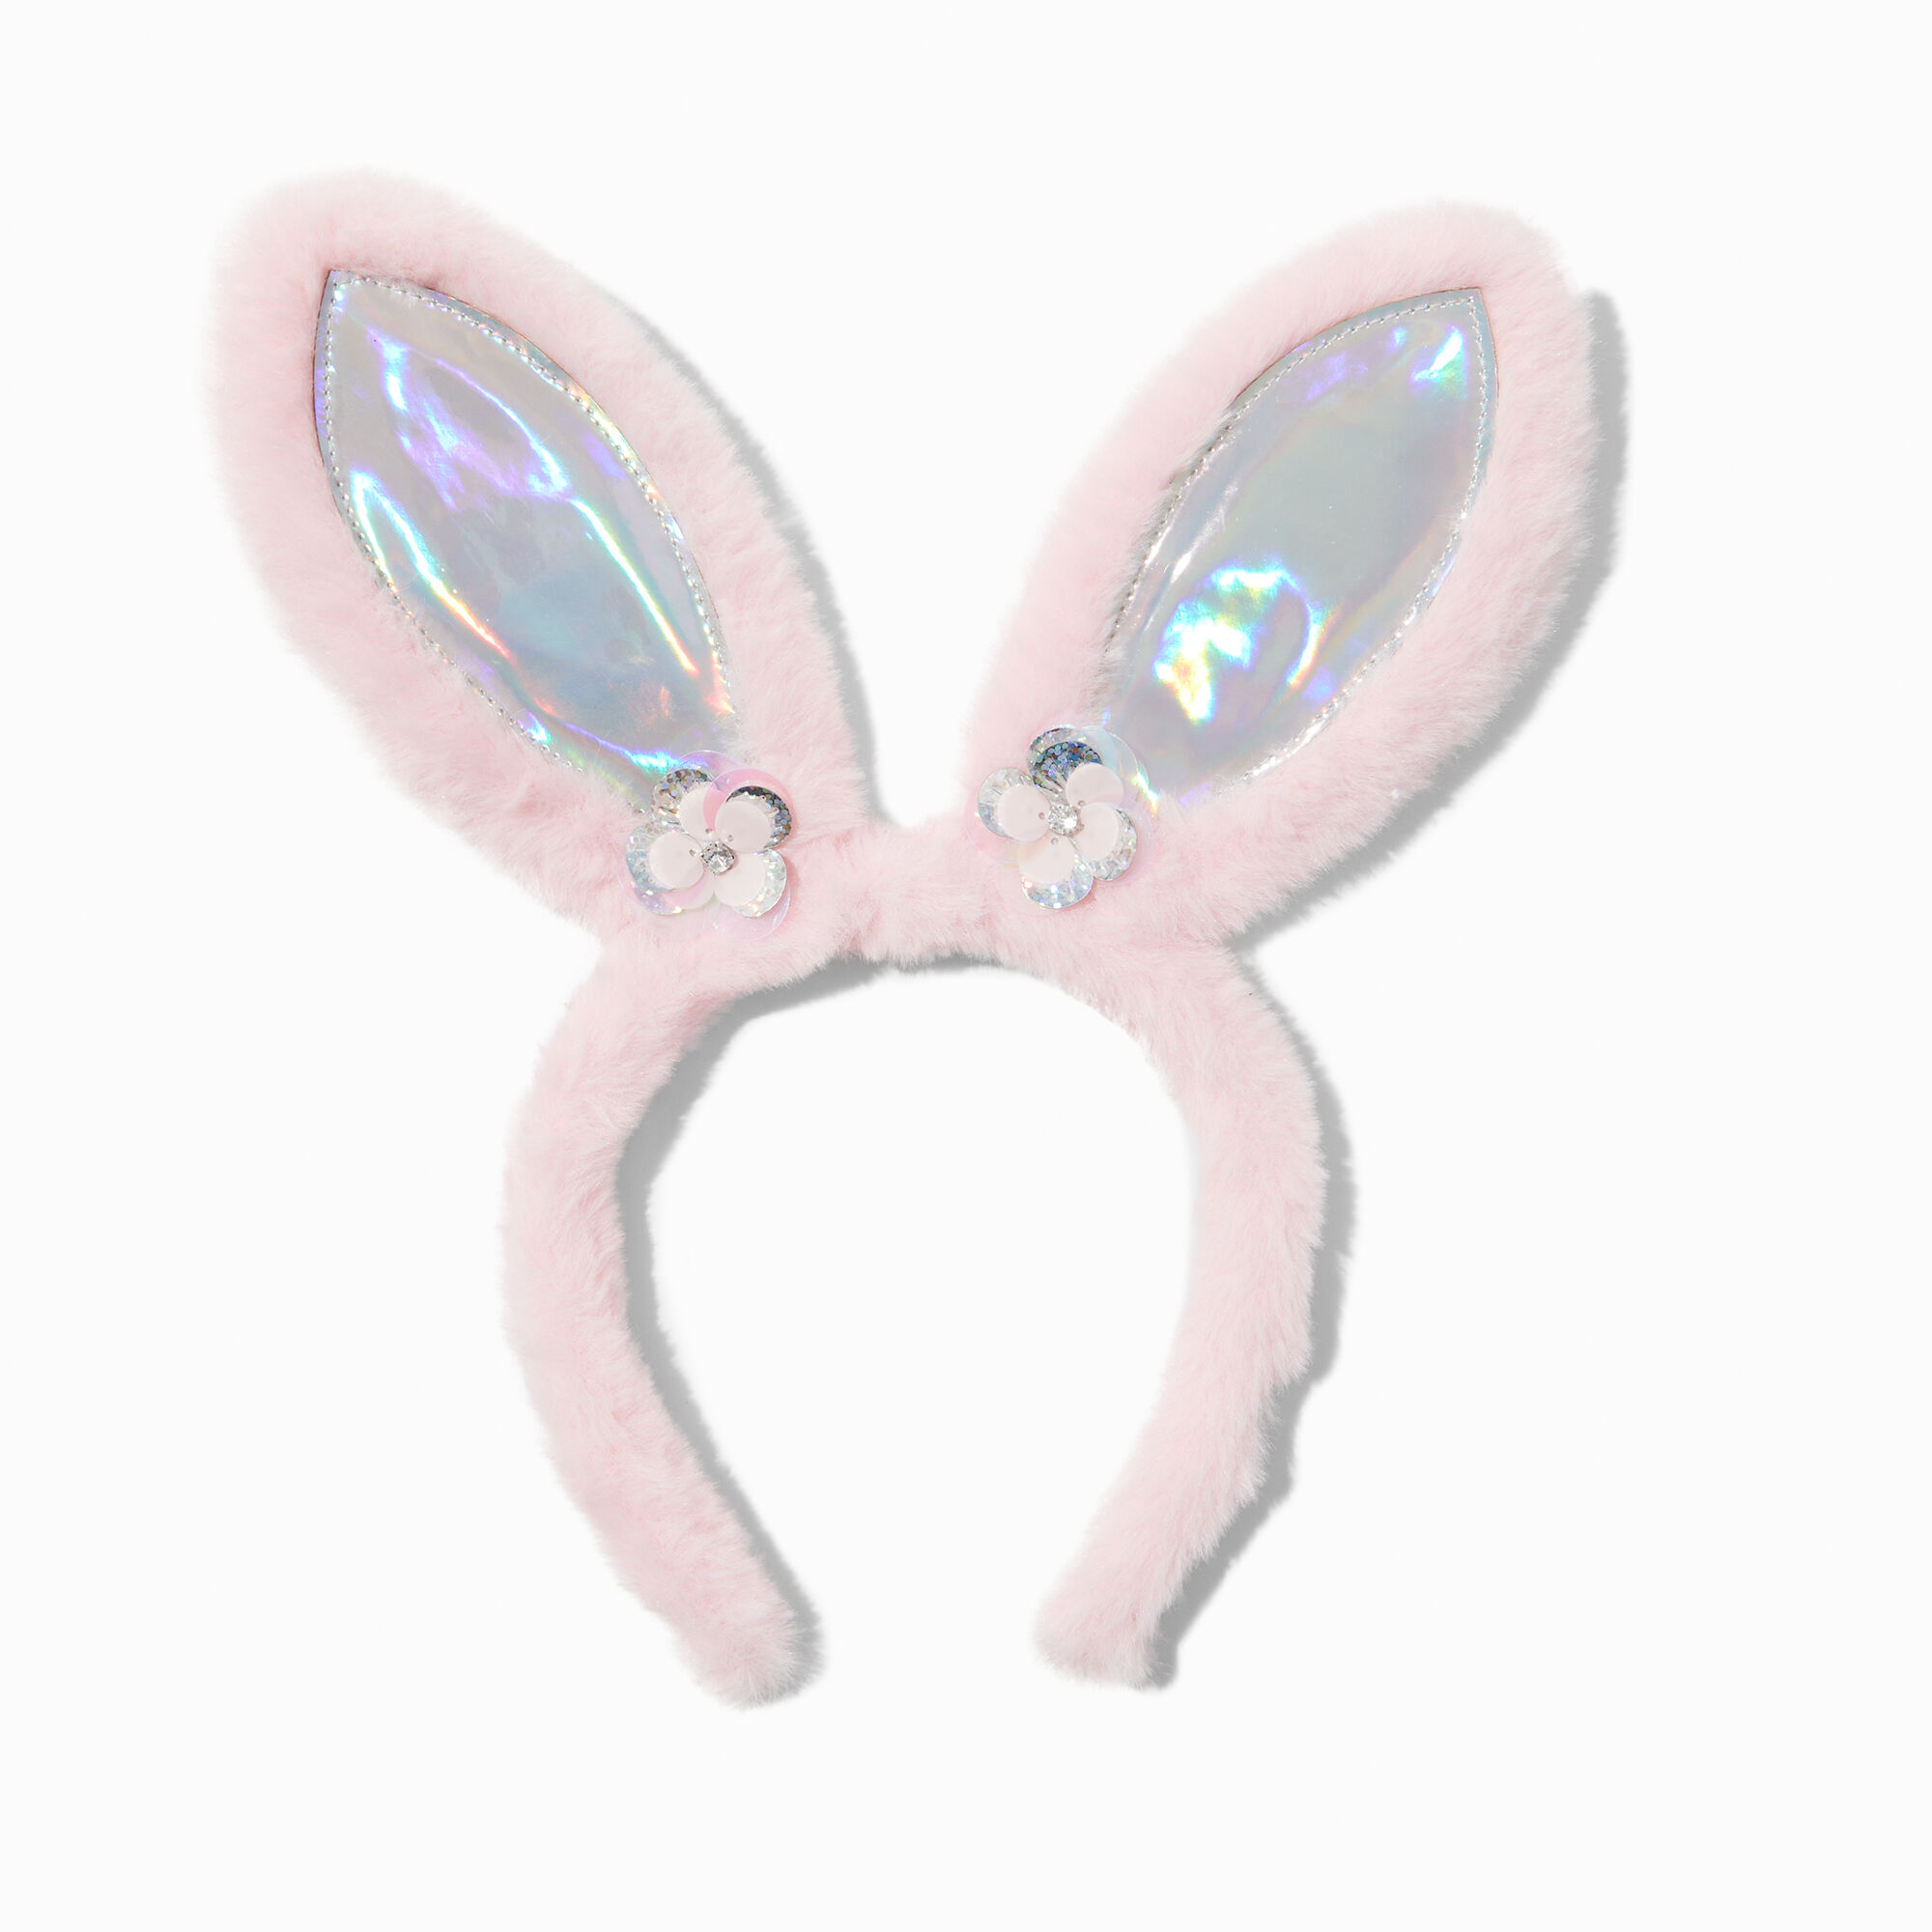 View Claires Plush Iridescent Bunny Ears Headband Pink information